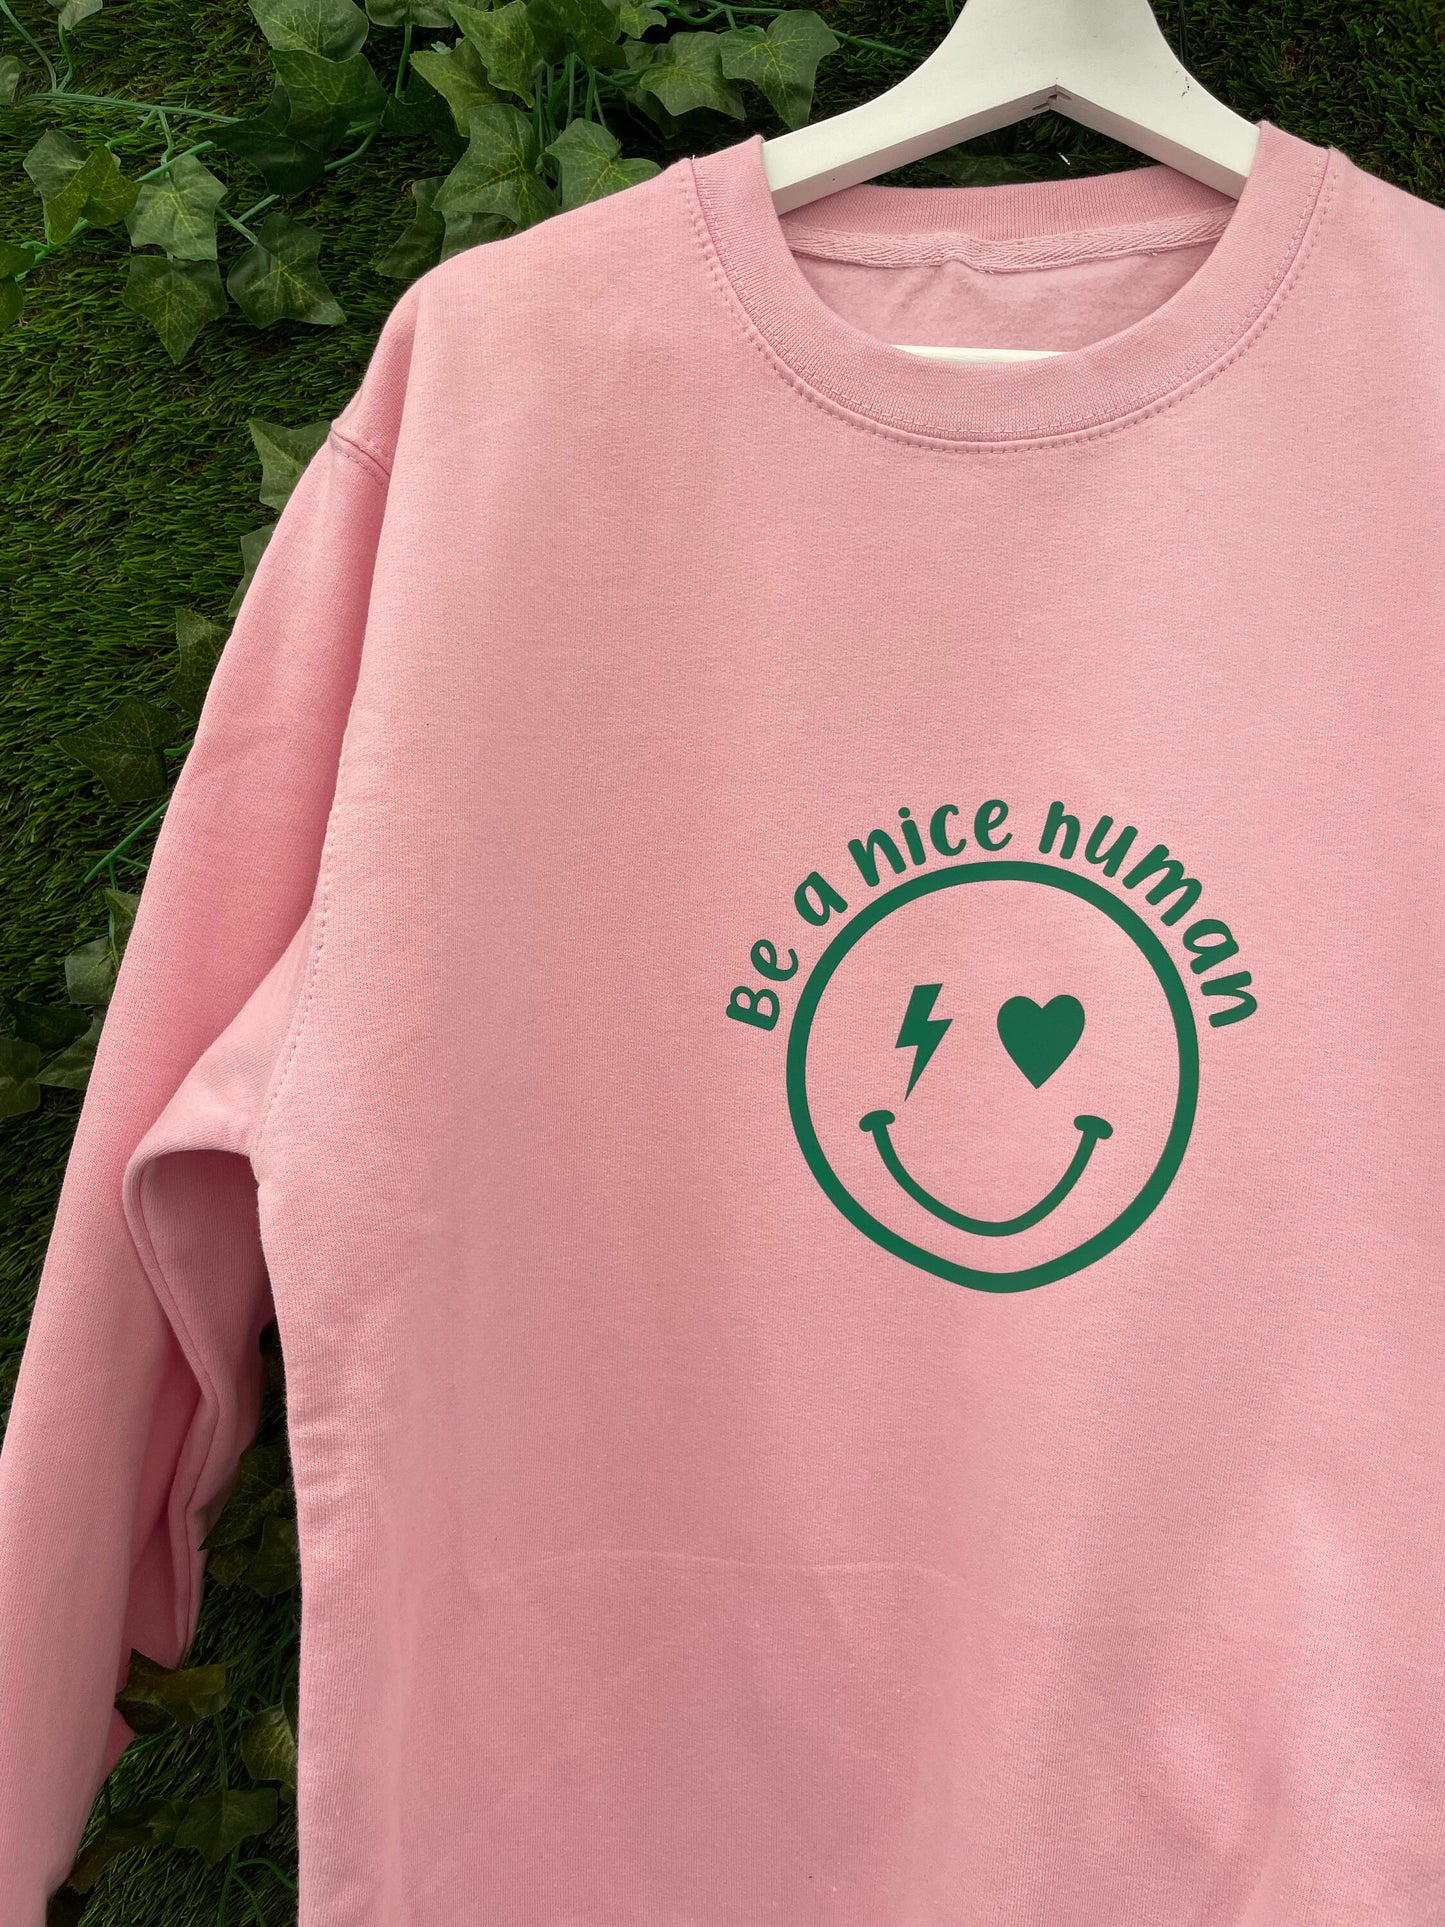 Be A Nice Human Slogan Sweatshirt, Kindness, Lightning Bolt Smiley Face Sweater, Gift For Her, Friendship Gift, Cool to Be Kind Unisex Fit